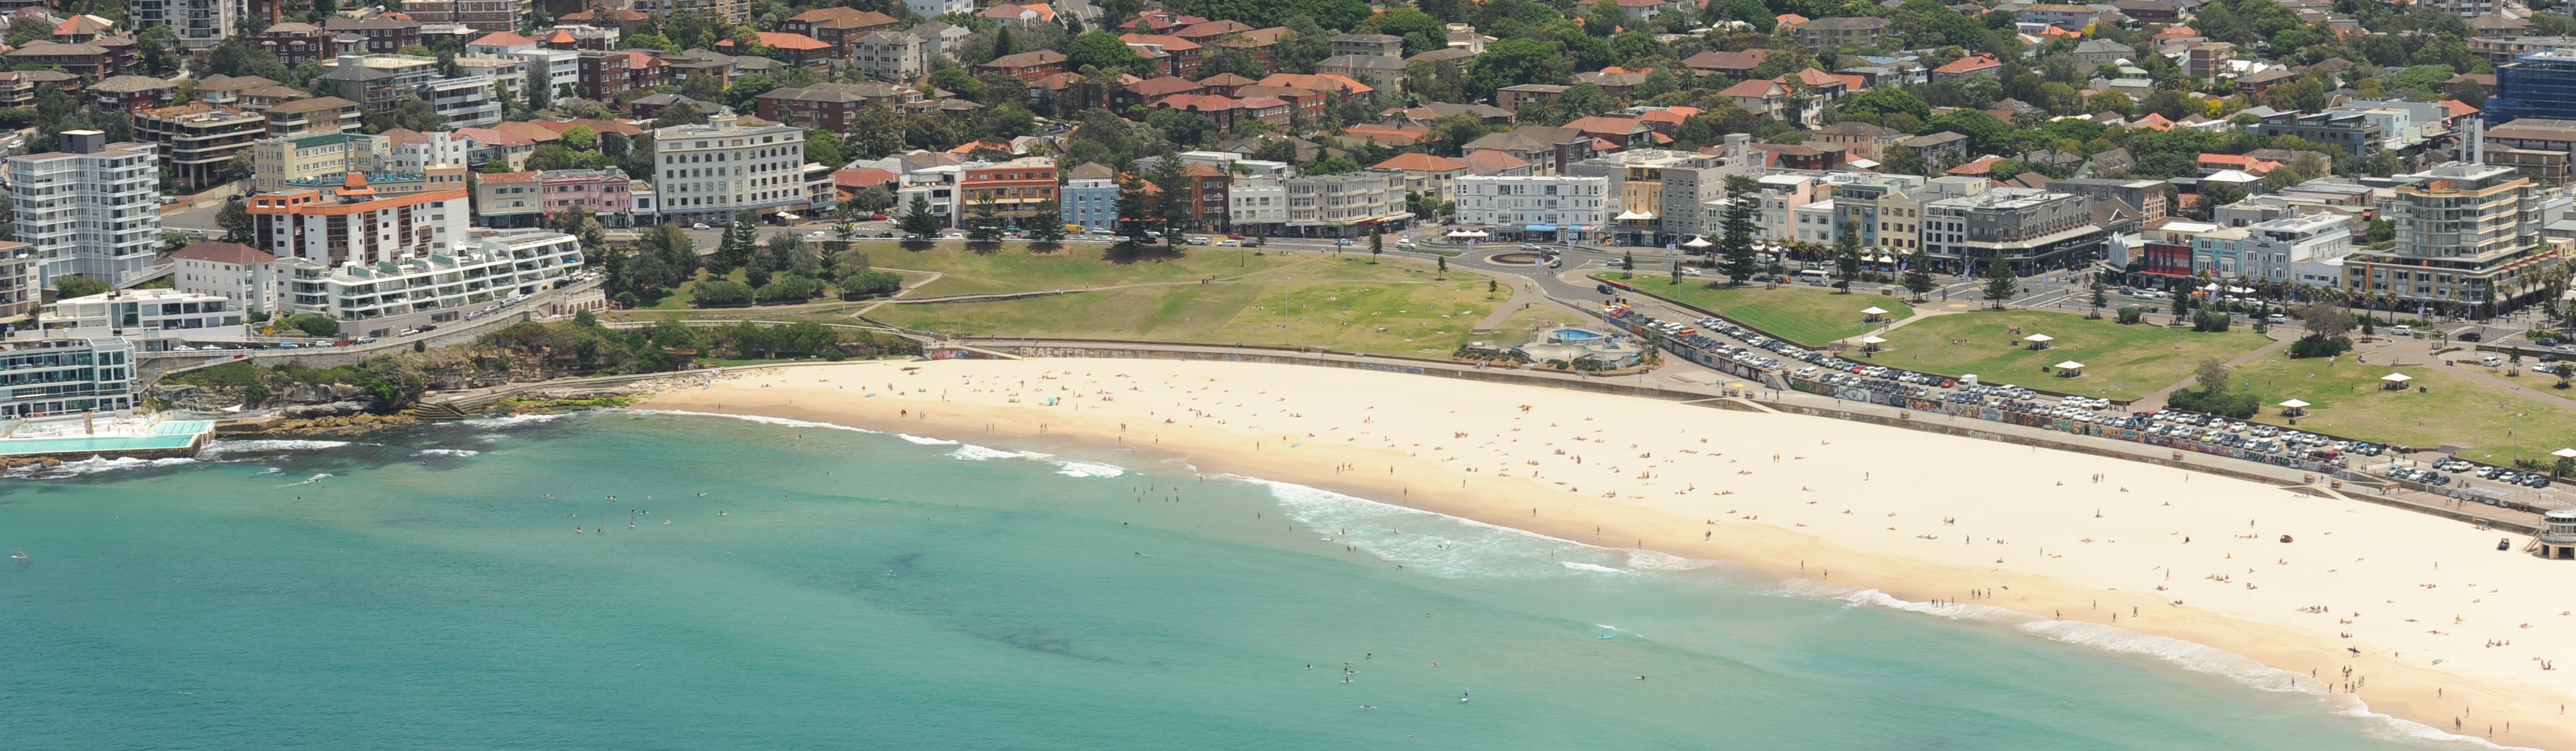 Oblique aerial photograph showing Sydney's Bondi Beach, residential and high-rise development